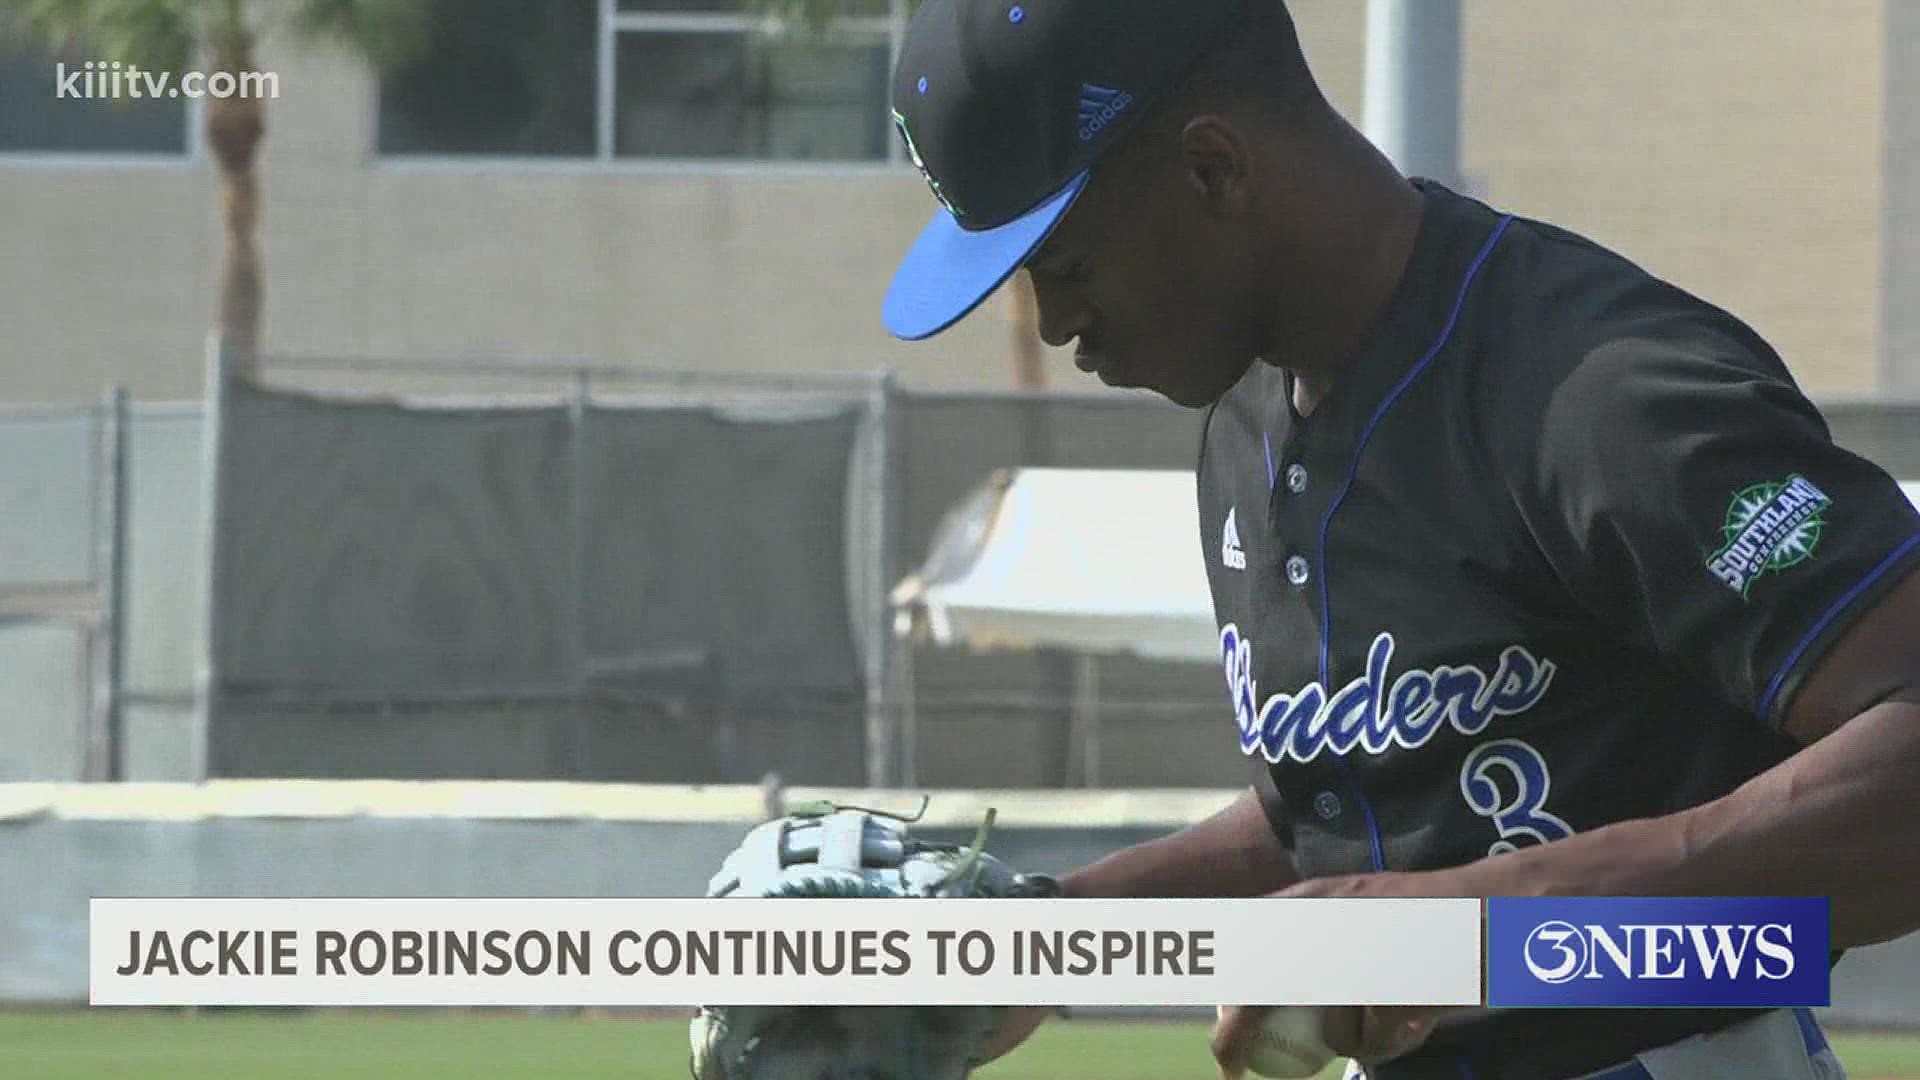 Tre Jones of the Islanders Baseball team said because of Jackie Robinson, he can inspire young athletes who want to play at the next level.